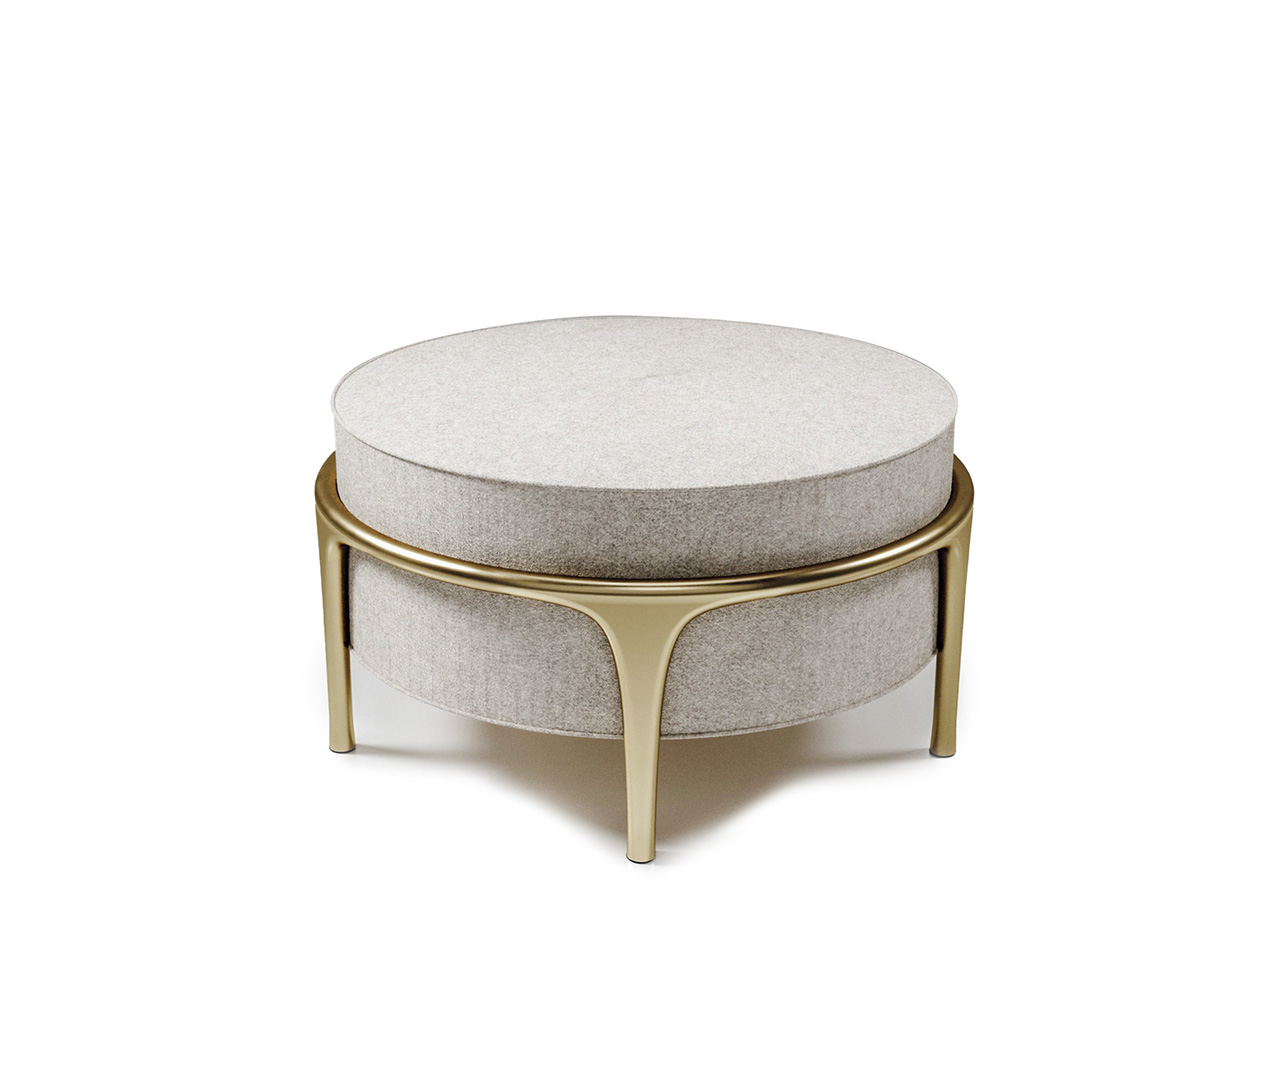 Stainless Steel and Upholstery Pouf